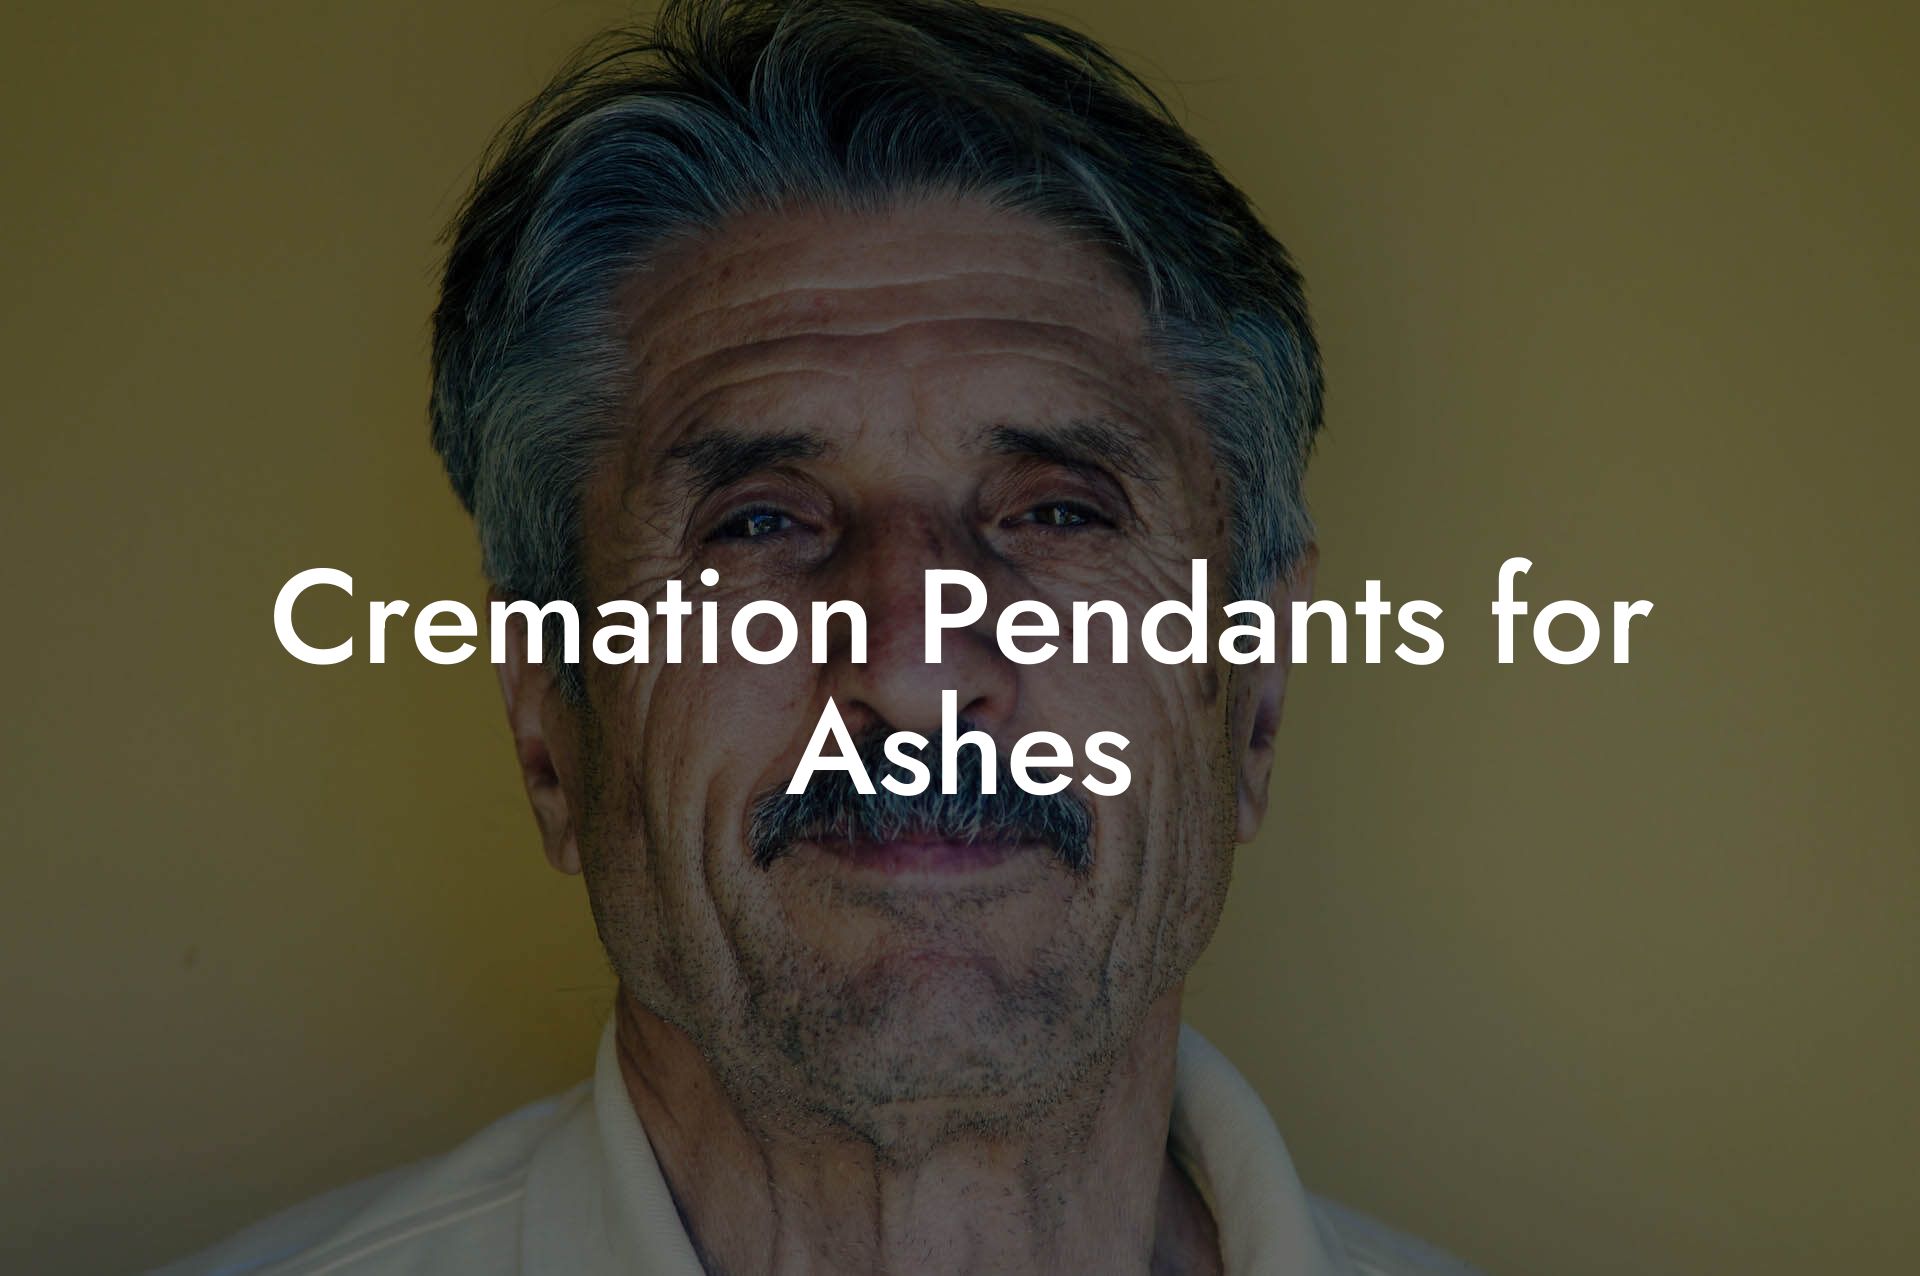 Cremation Pendants for Ashes